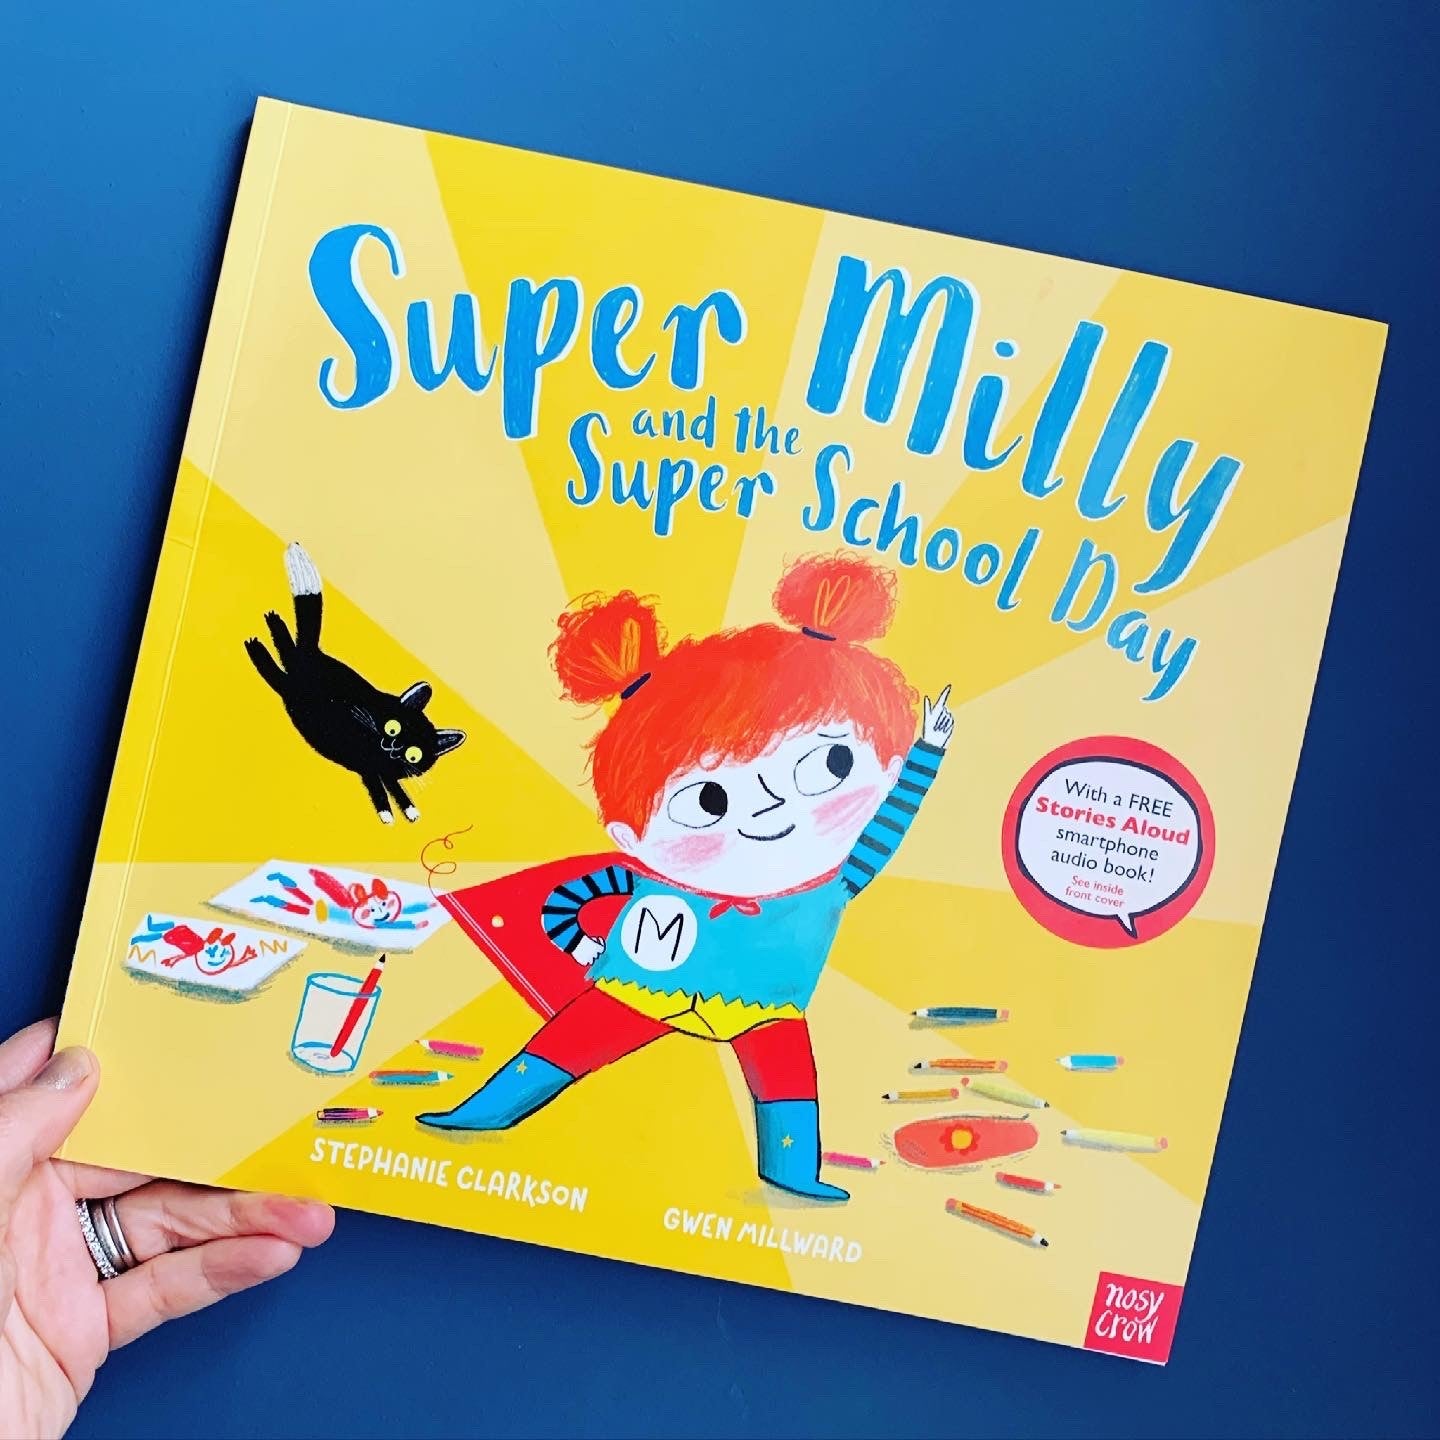 Super Milly and the Super School Day